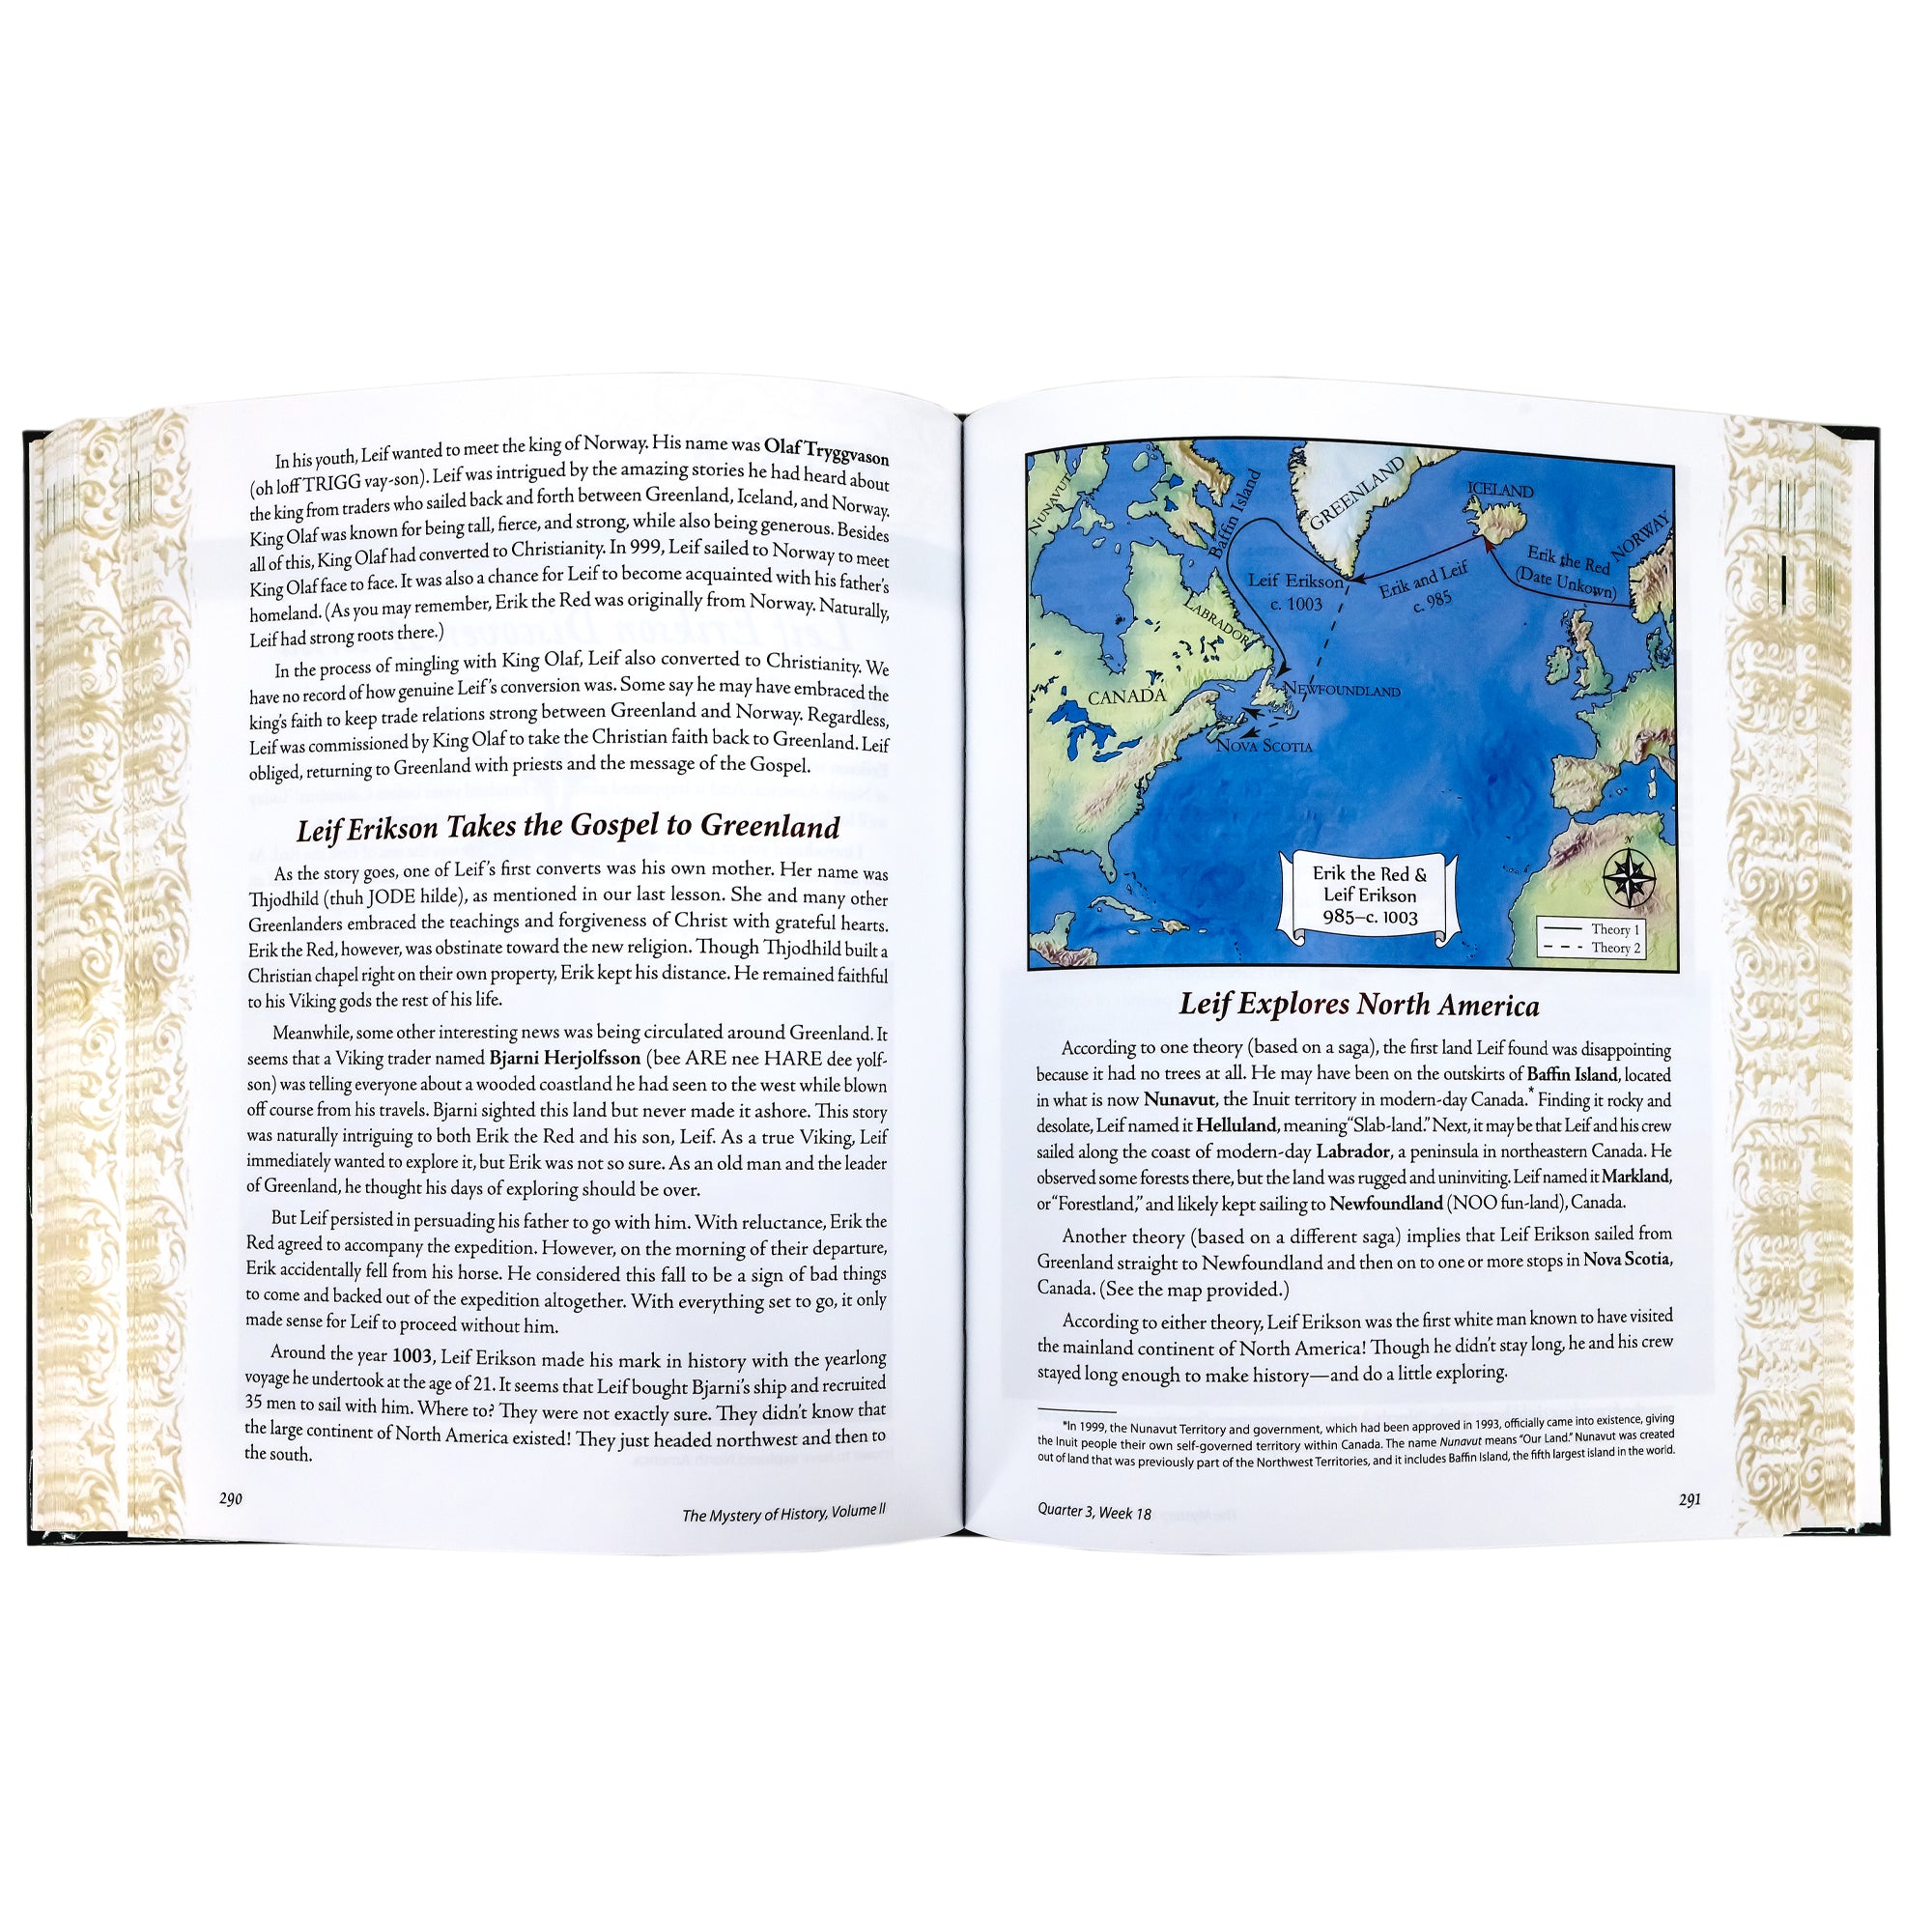 The Mystery of History volume 2 book opened. showing text and a map on the top-right page showing the movements of Erik the Red & Leif Erikson from Norway to Iceland to Greenland to Newfoundland. Under the map is the title "Leif Explores North America."